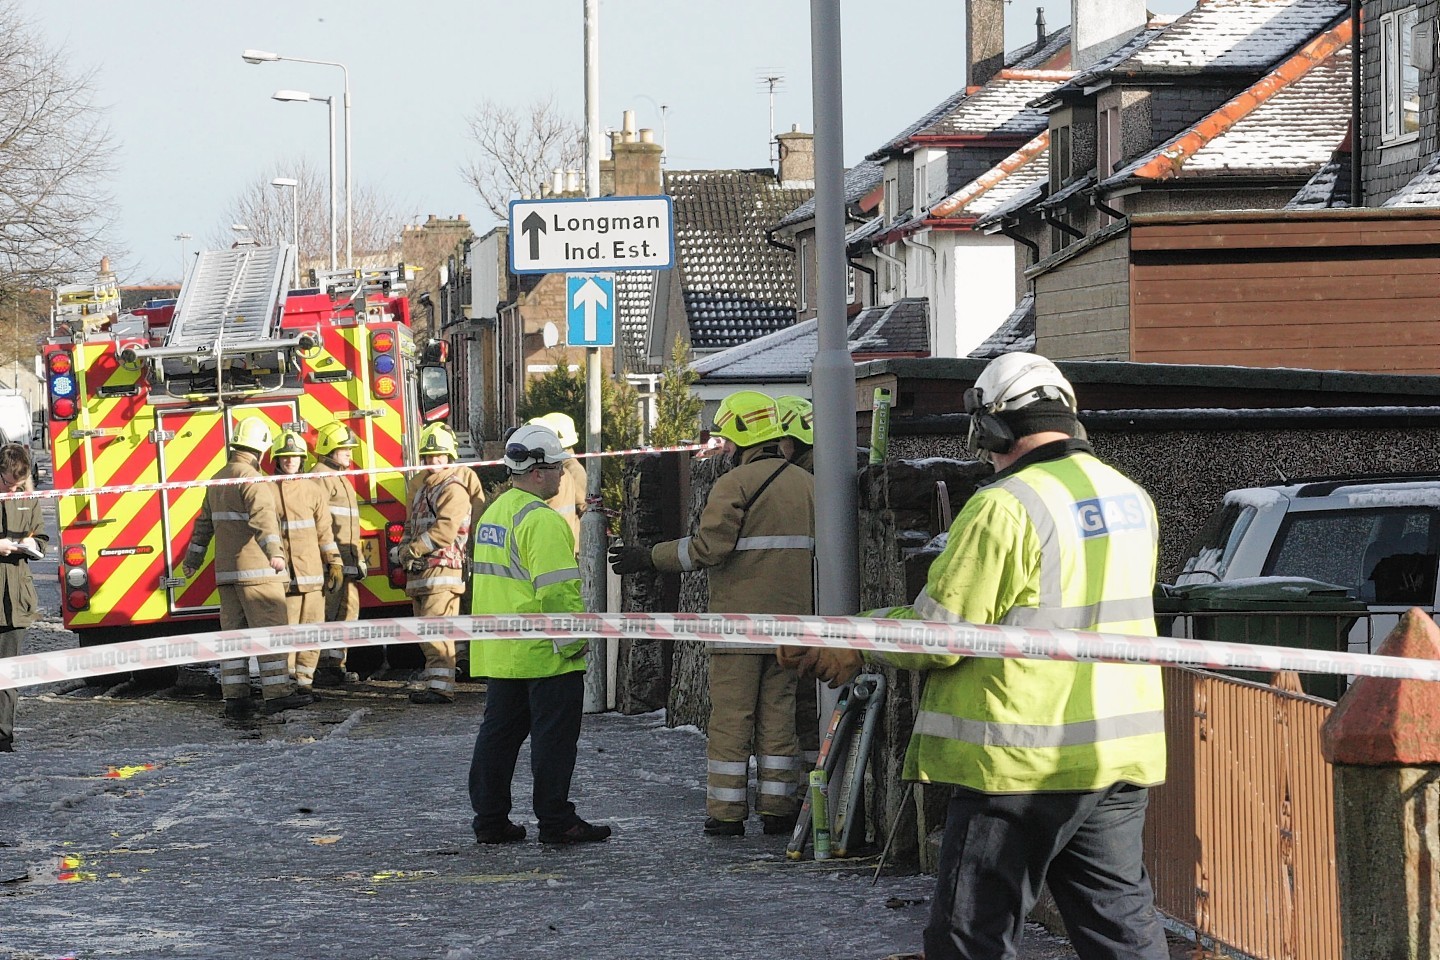 Emergency services spent the morning at the scene on Abban Street